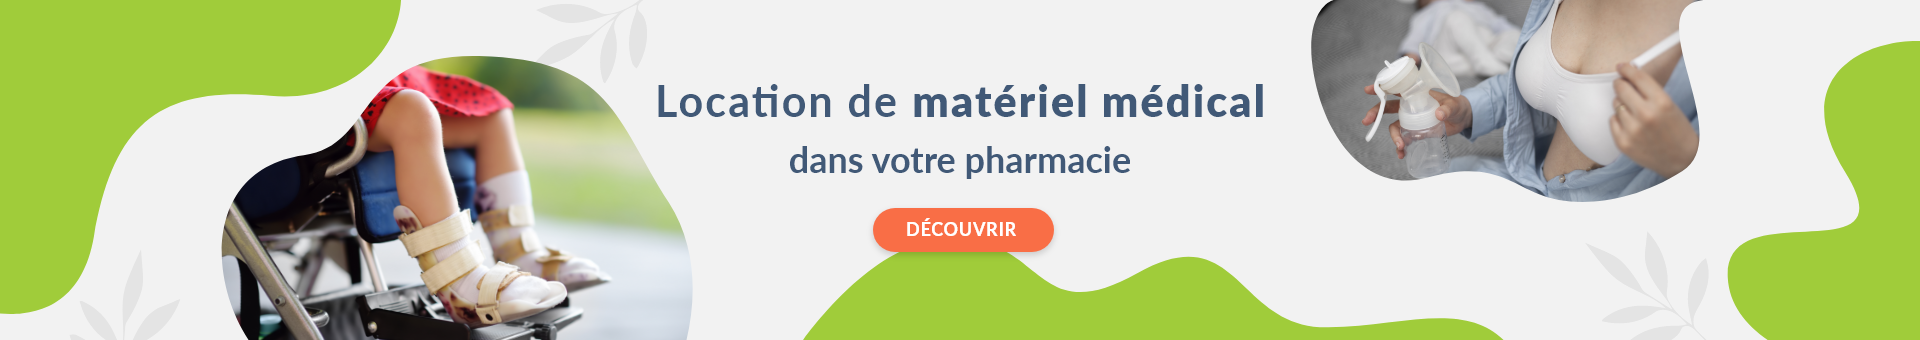 Pharmacie de Nommay,Nommay